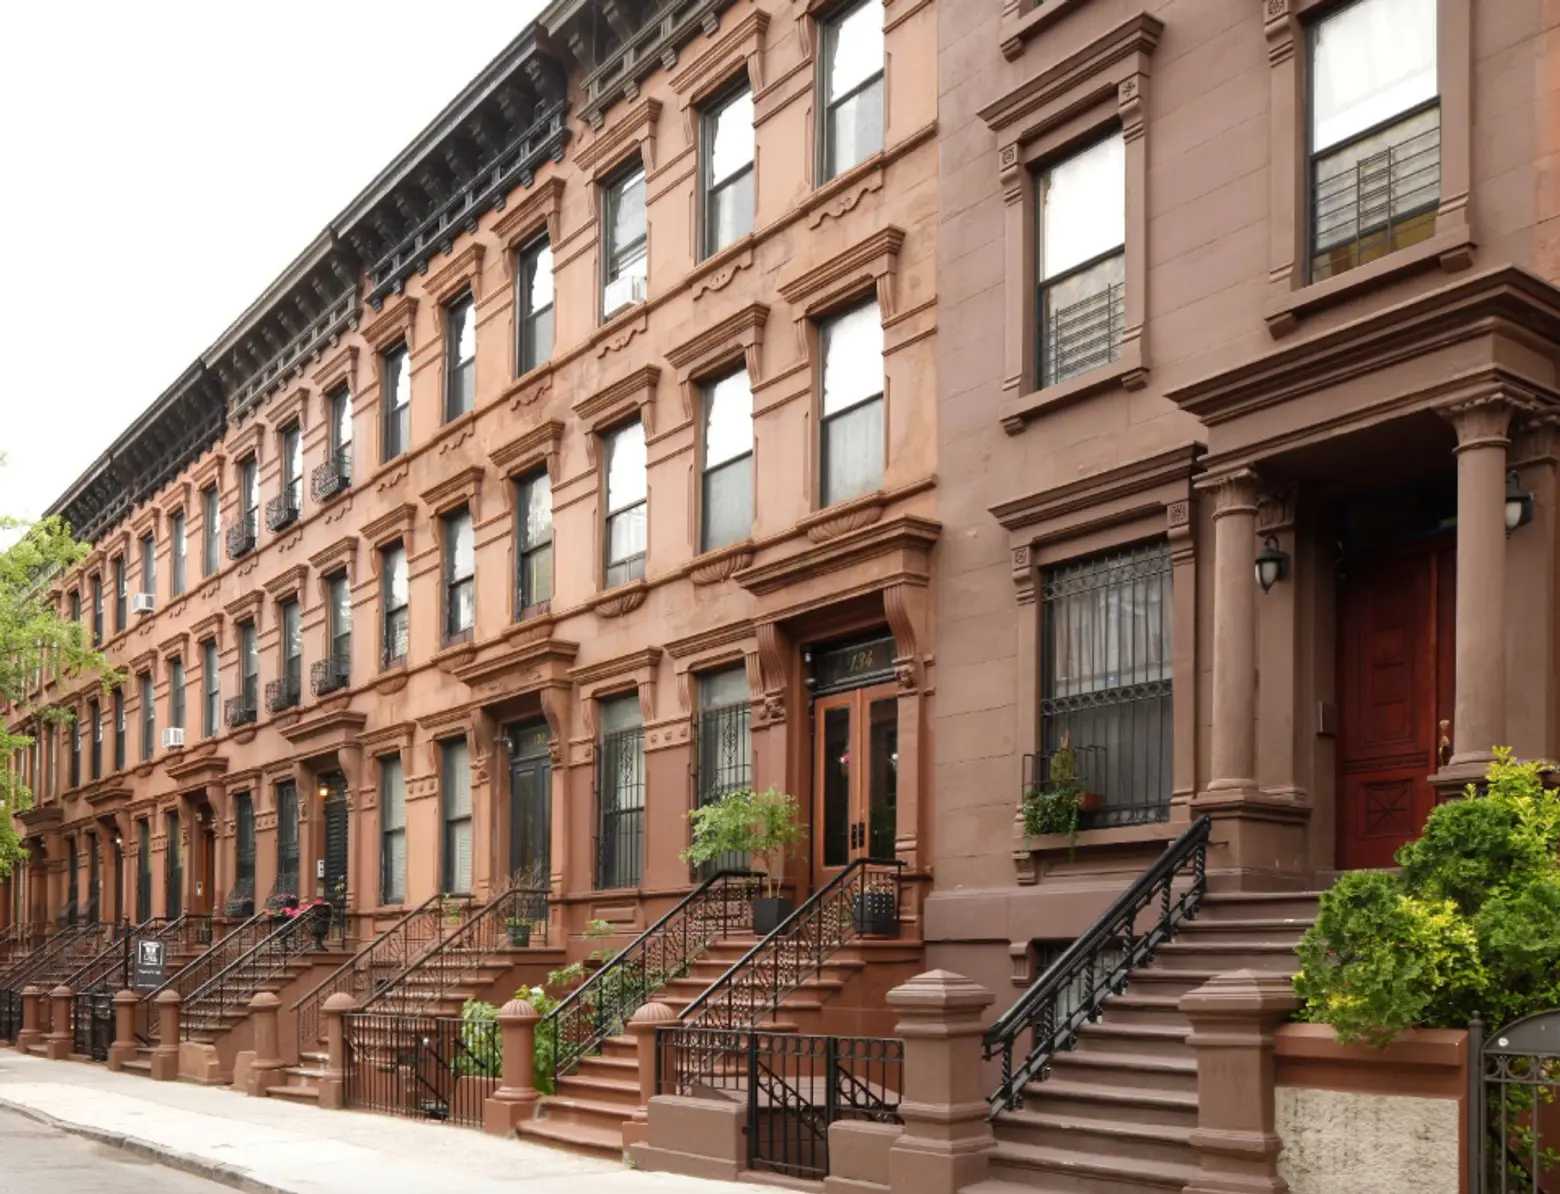 A mecca of African American history and culture, Central Harlem is designated a historic district